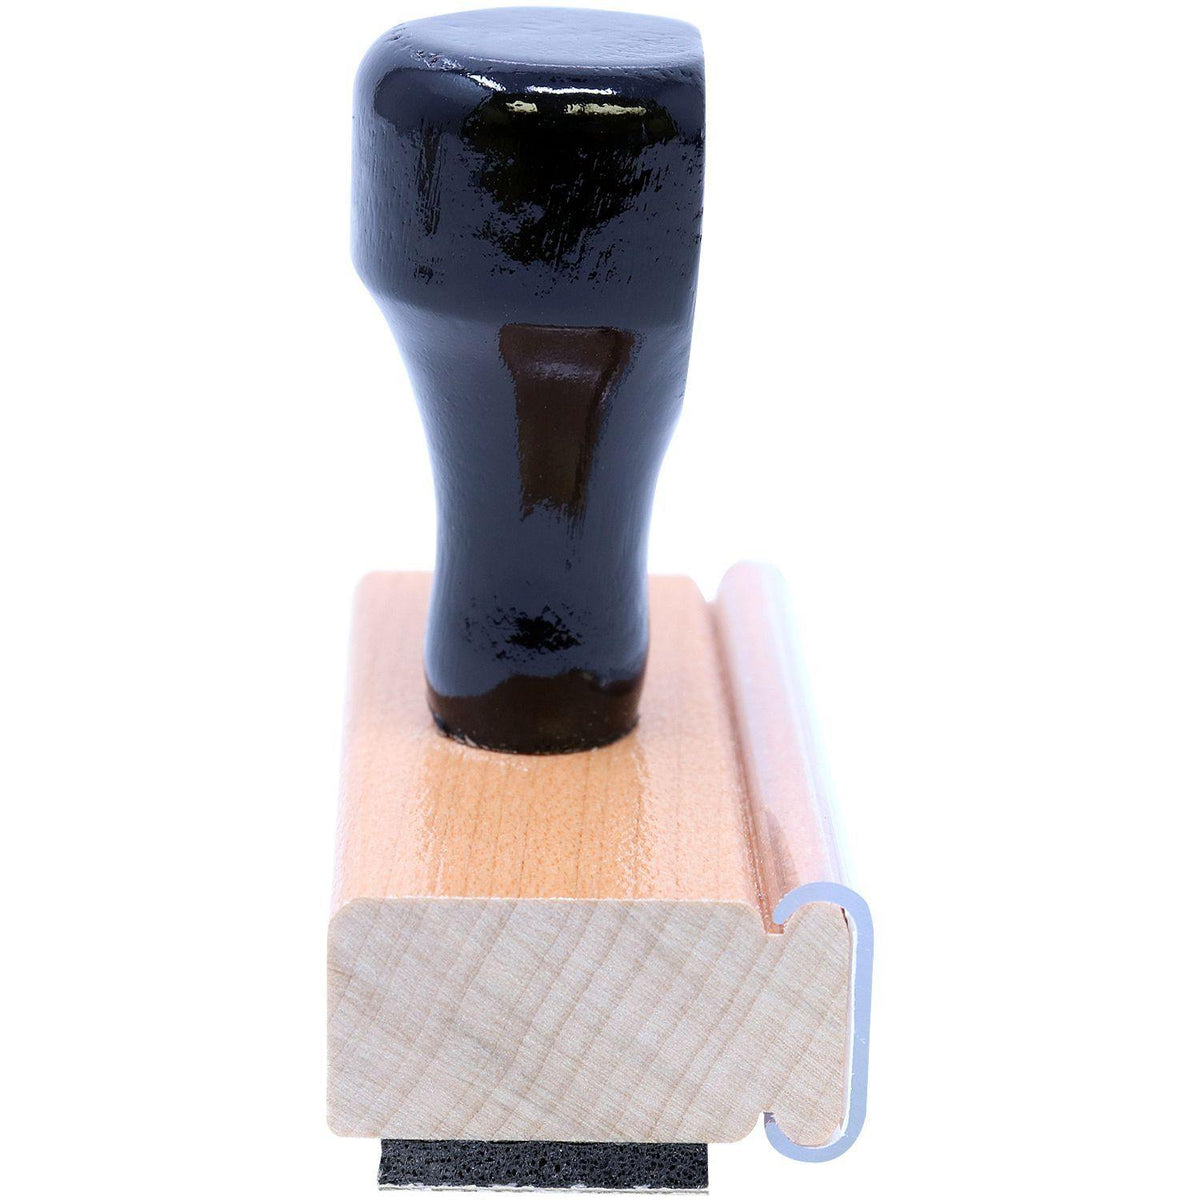 Recibido Rubber Stamp - Engineer Seal Stamps - Brand_Acorn, Impression Size_Small, Stamp Type_Regular Stamp, Type of Use_Office, Type of Use_Postal &amp; Mailing, Type of Use_Shipping &amp; Receiving